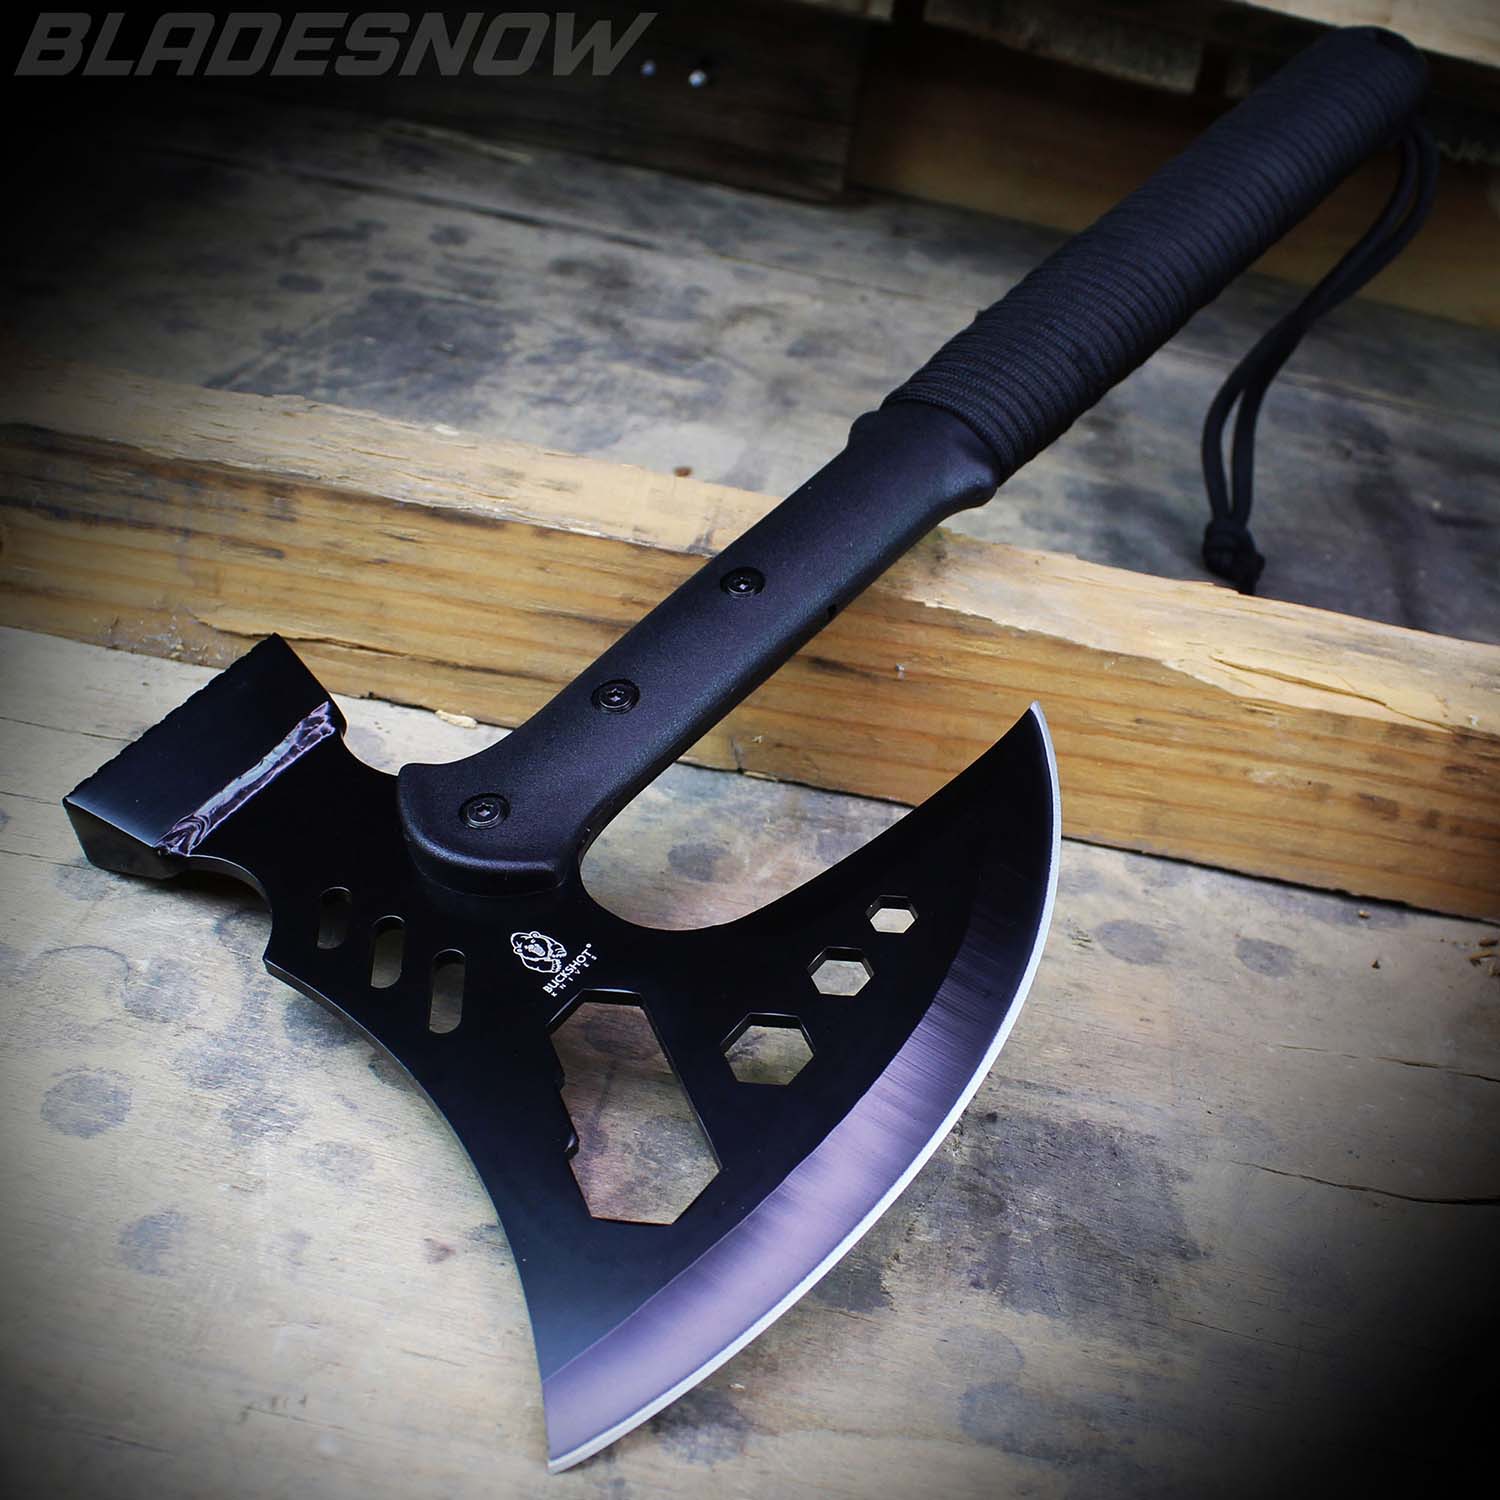 View All Products - Blades Now Knives & Swords | 2